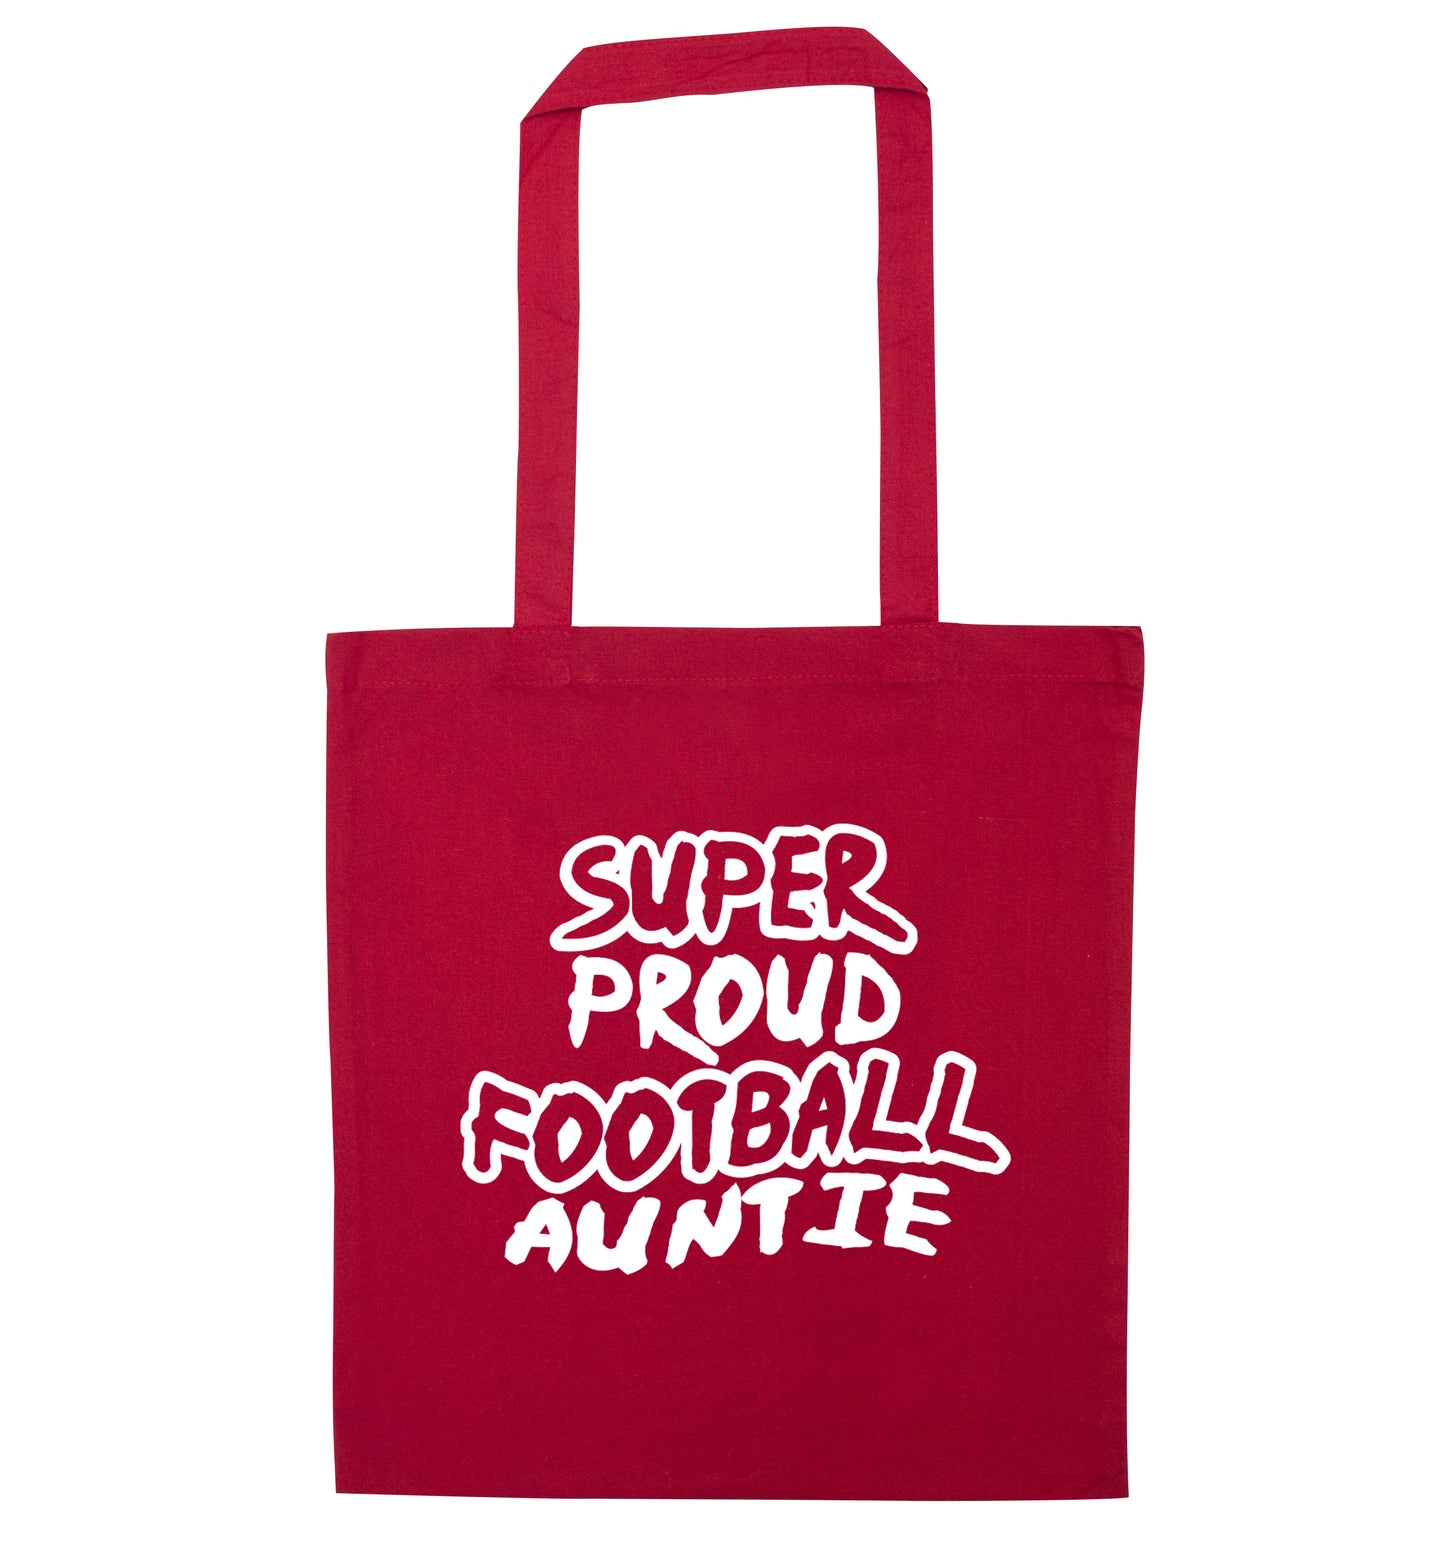 Super proud football auntie red tote bag